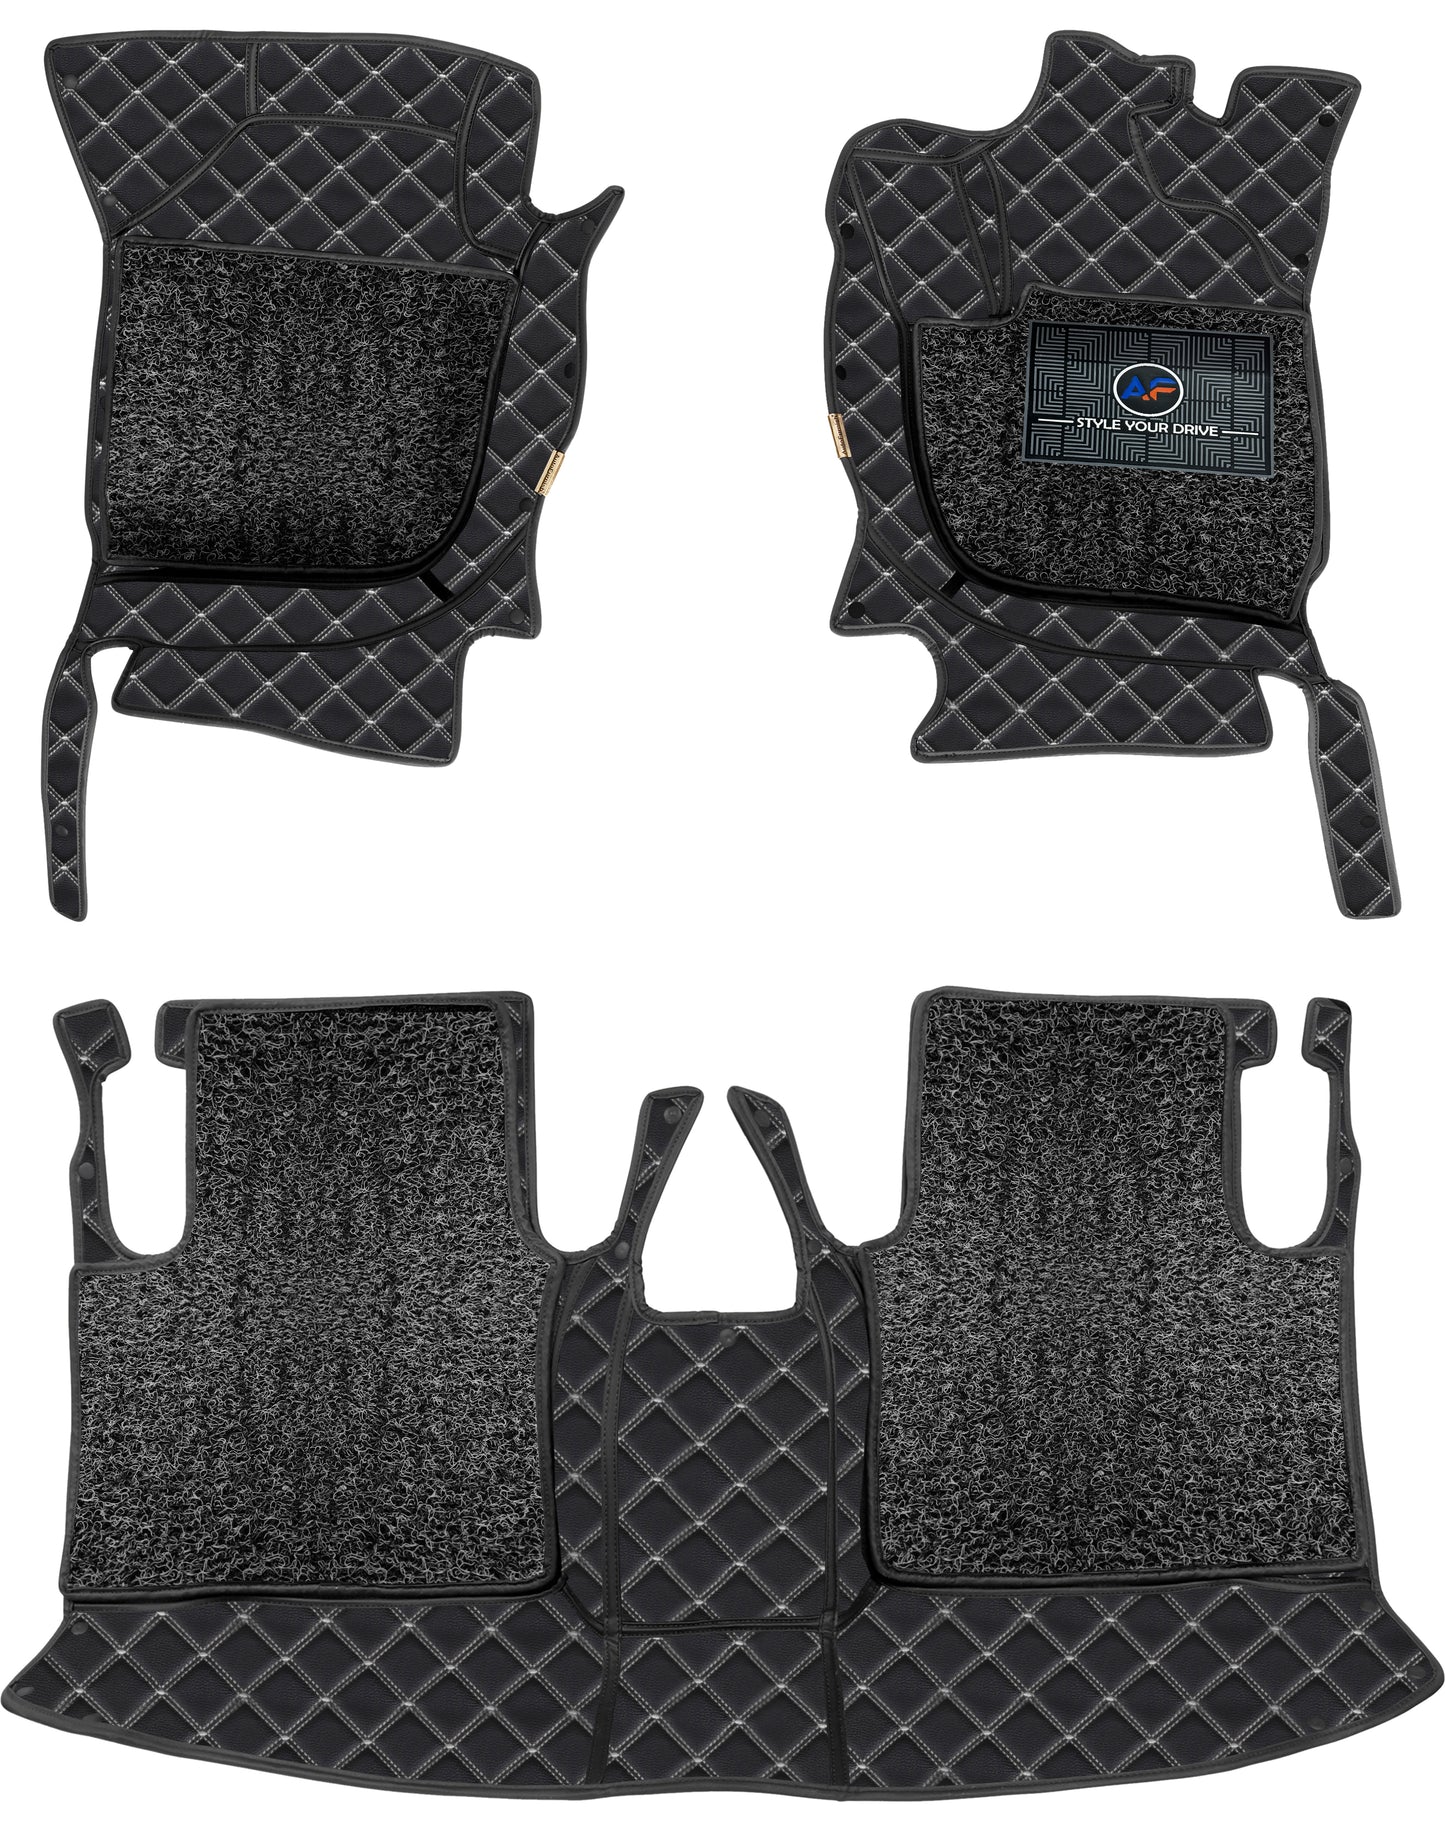 Volvo XC60 2015-18 7D Luxury Car Mat, All Weather Proof, Anti-Skid, 100% Waterproof & Odorless with Unique Diamond Fish Design (24mm Luxury PU Leather, 2 Rows)